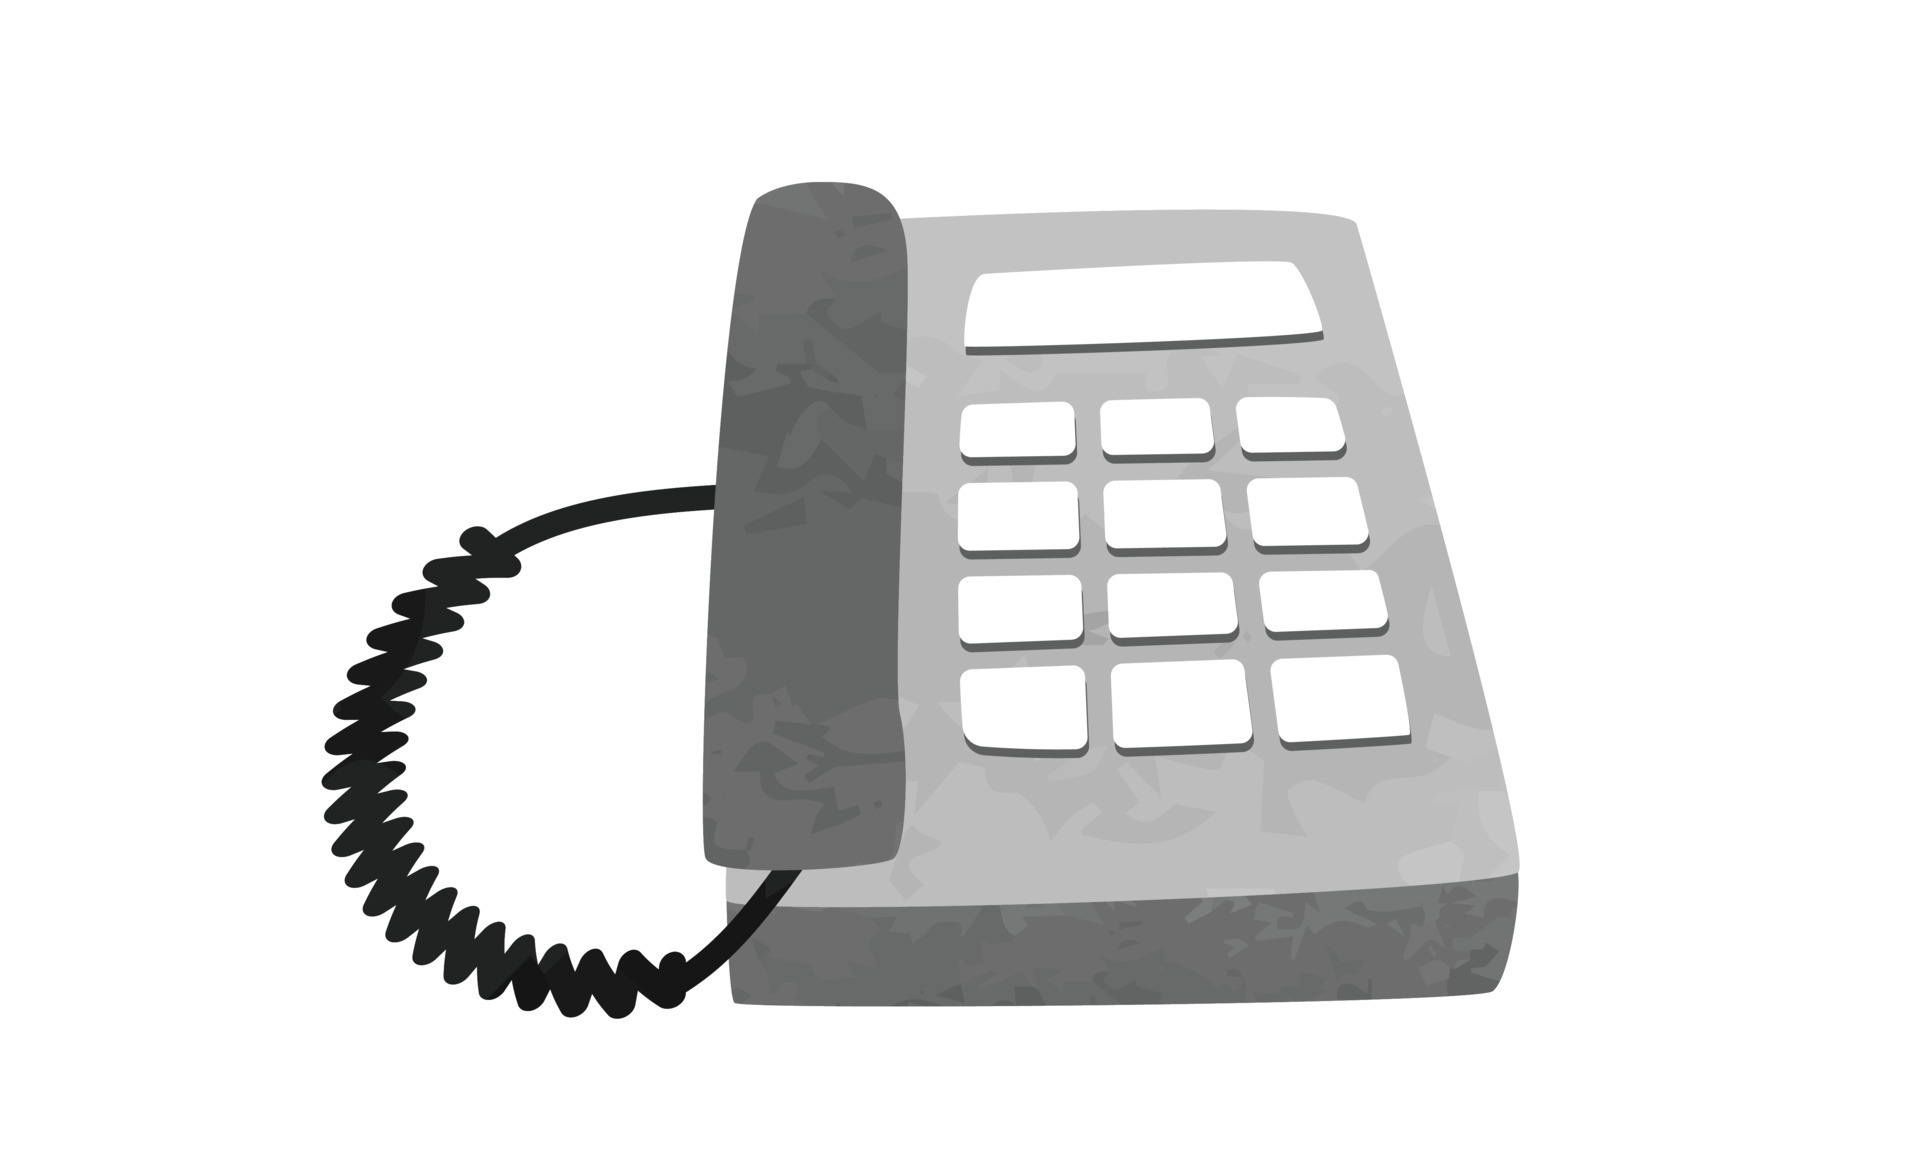 https://static.vecteezy.com/system/resources/previews/011/067/353/original/classic-telephone-clipart-simple-telephone-with-keypad-for-office-desk-watercolor-style-illustration-isolated-on-white-cute-telephone-cartoon-hand-drawn-doodle-style-office-supplies-drawing-vector.jpg